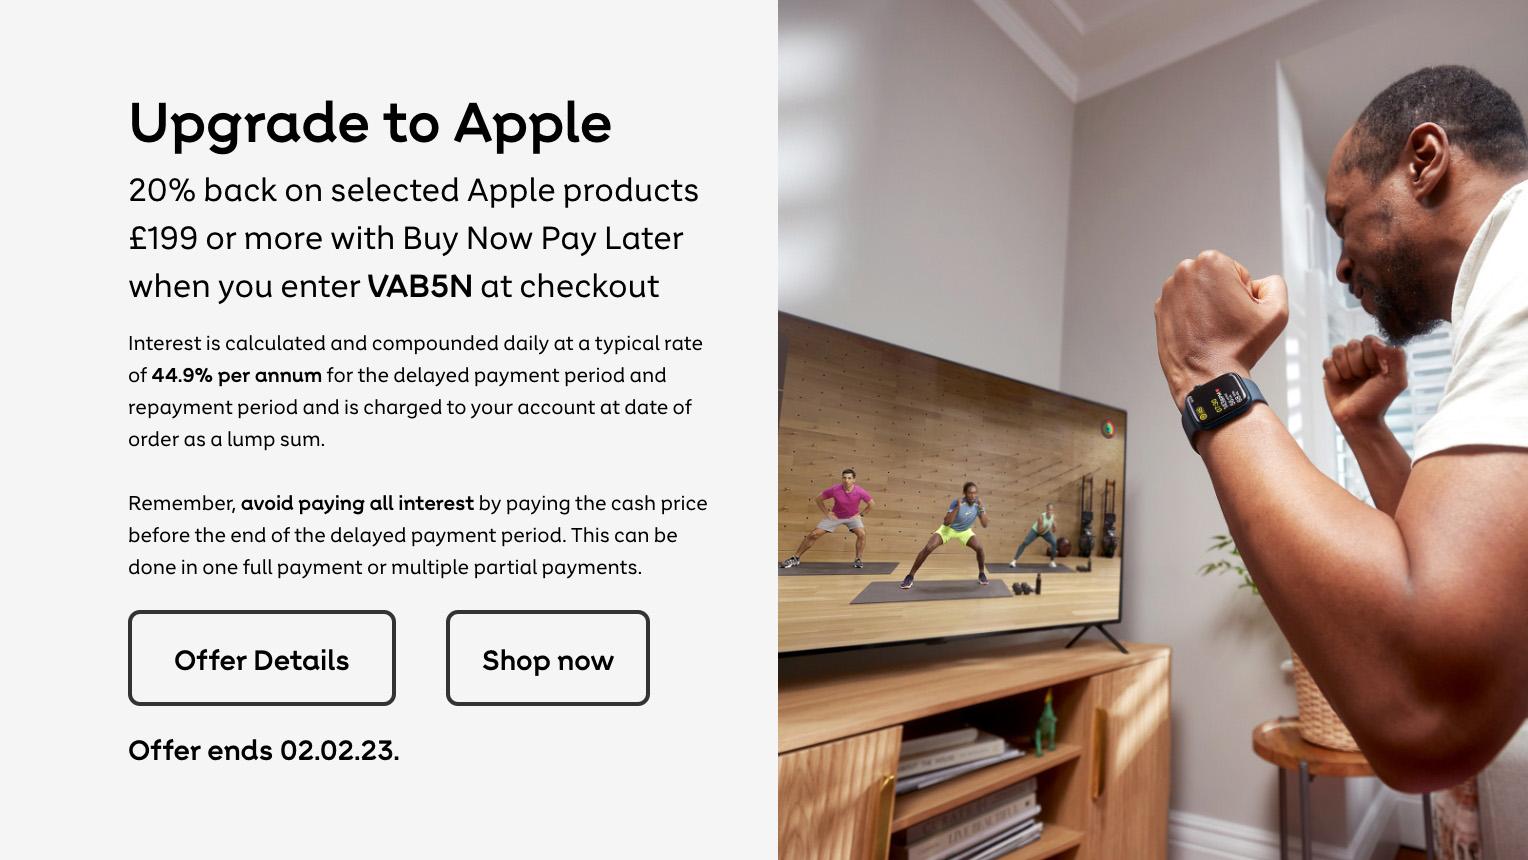 20% back on selected Apple products £199 or more with Buy Now Pay Later when you enter code VAB5N at checkout. Shop now.